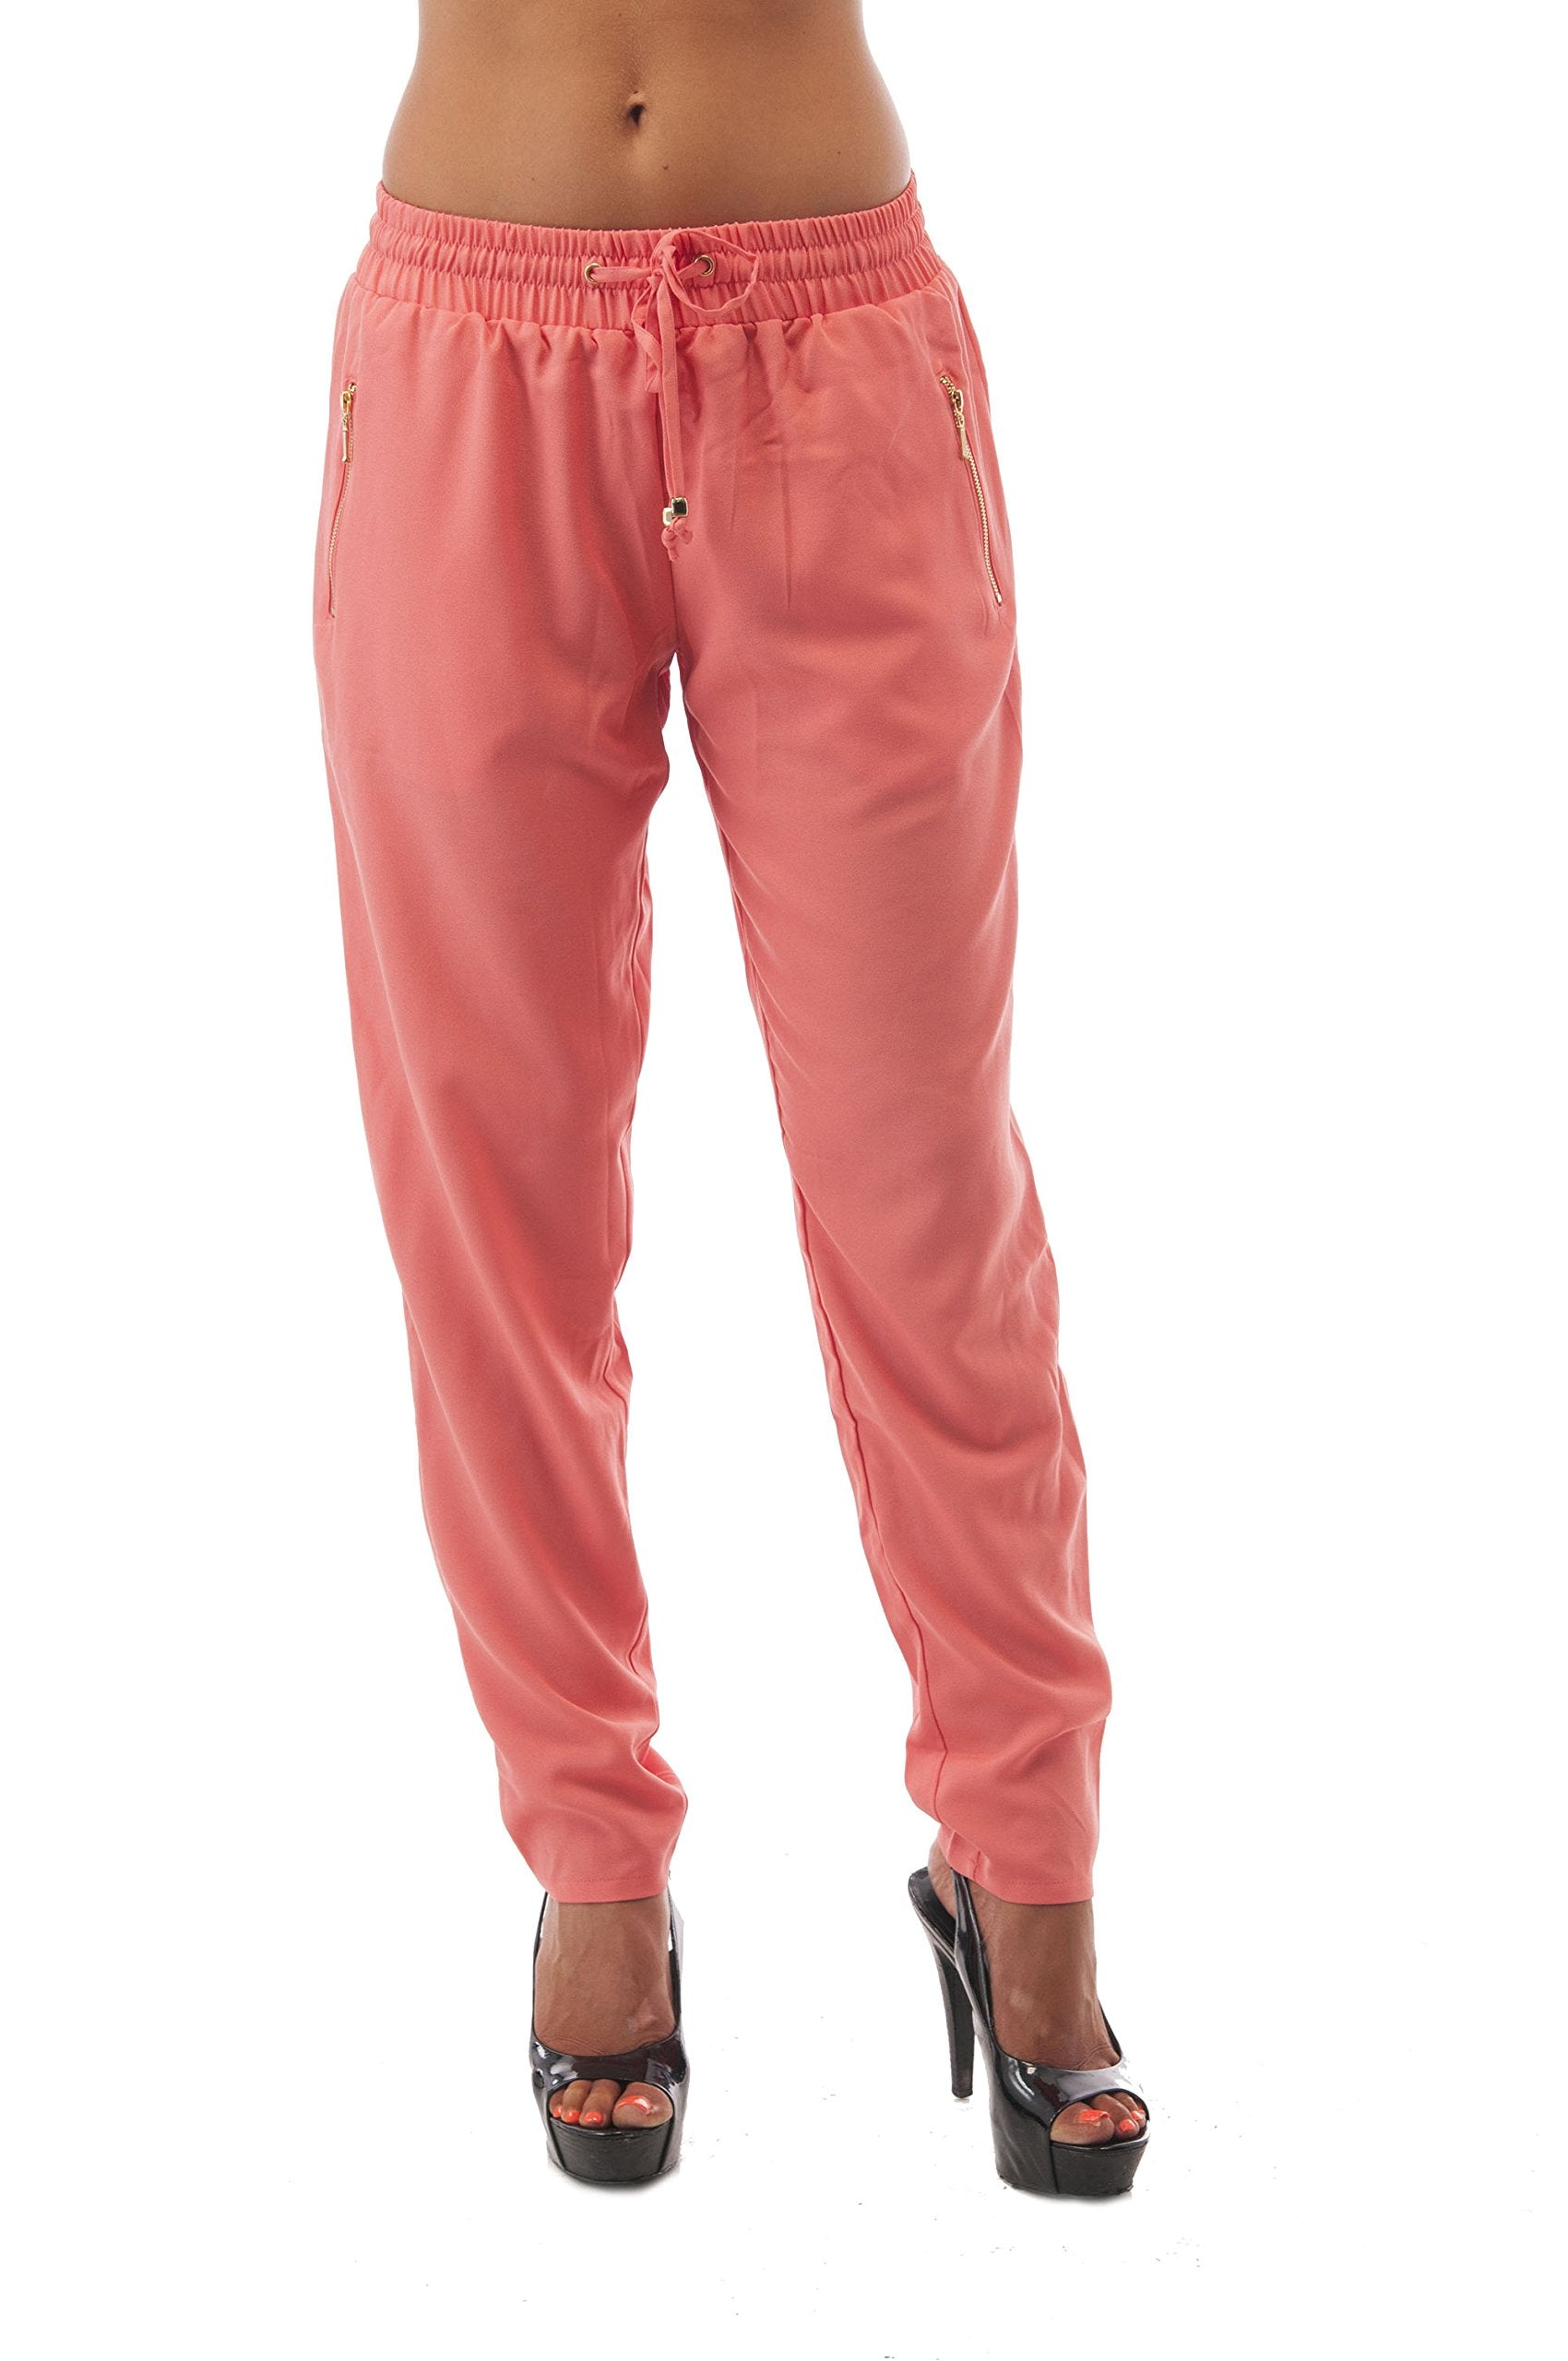 Hollywood Star Fashion Long Tapered Elastic Waist With Drawstrings Pants With Zipper Detail